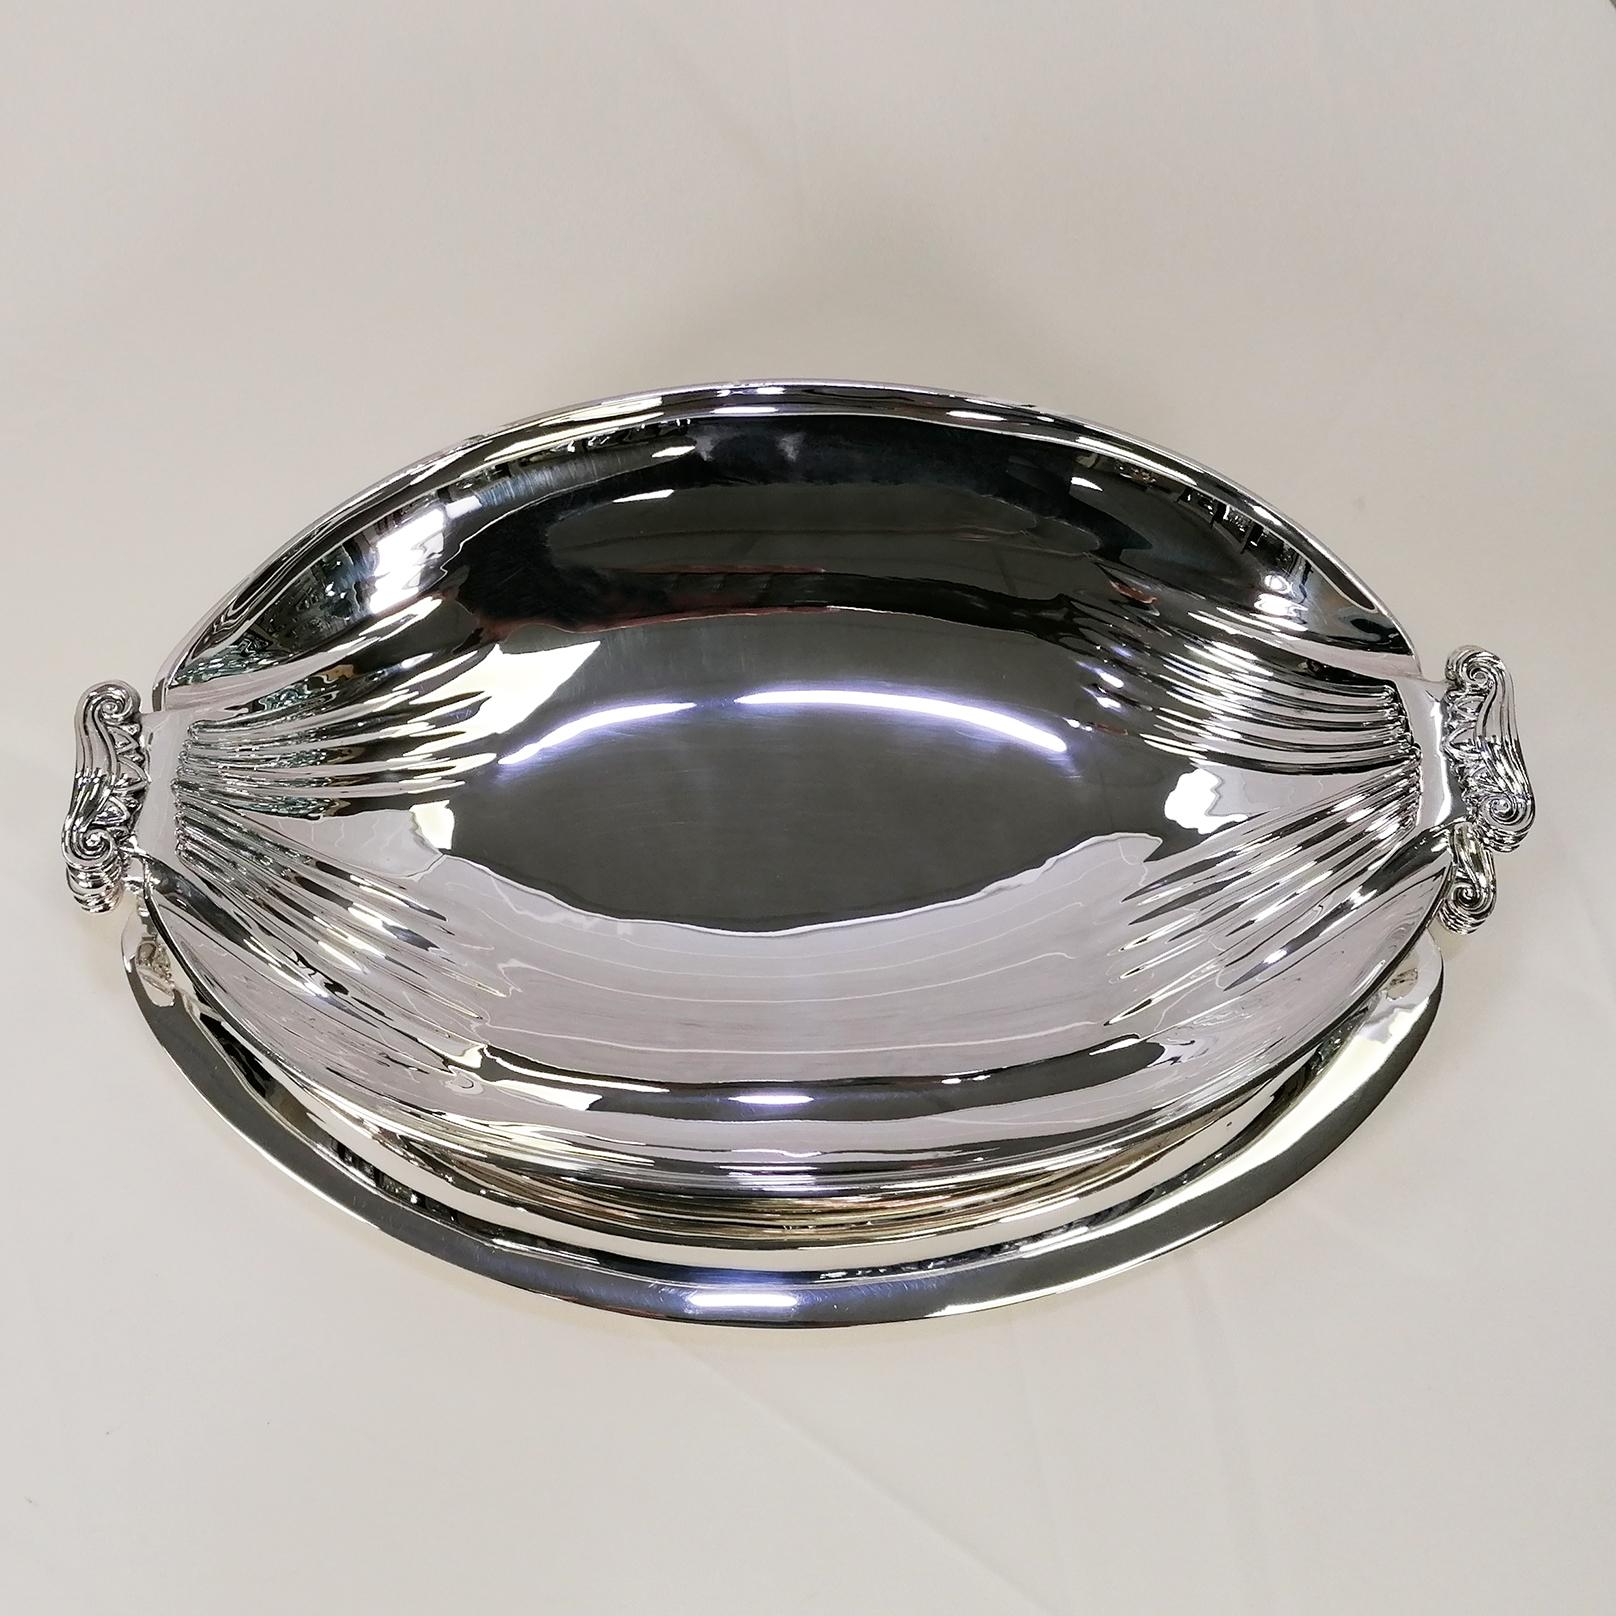 Forged XX Century Italian Sterling Silver Neoclassic Style Centerpiece Jatte plus Tray